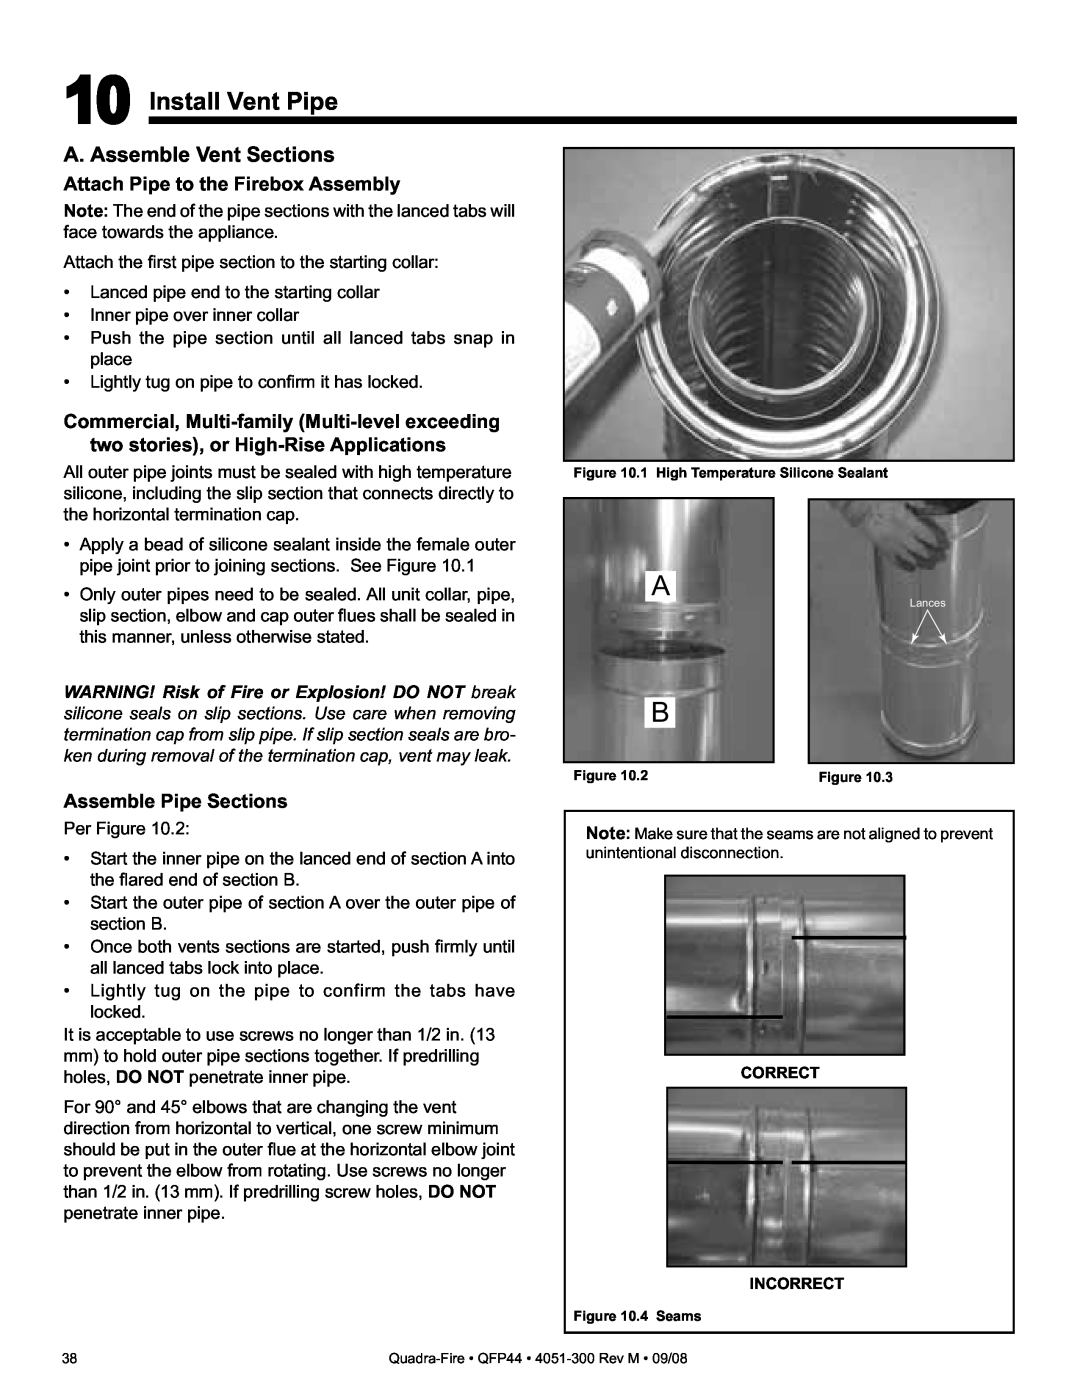 Quadra-Fire QFP44 owner manual Install Vent Pipe, A. Assemble Vent Sections, Attach Pipe to the Firebox Assembly 